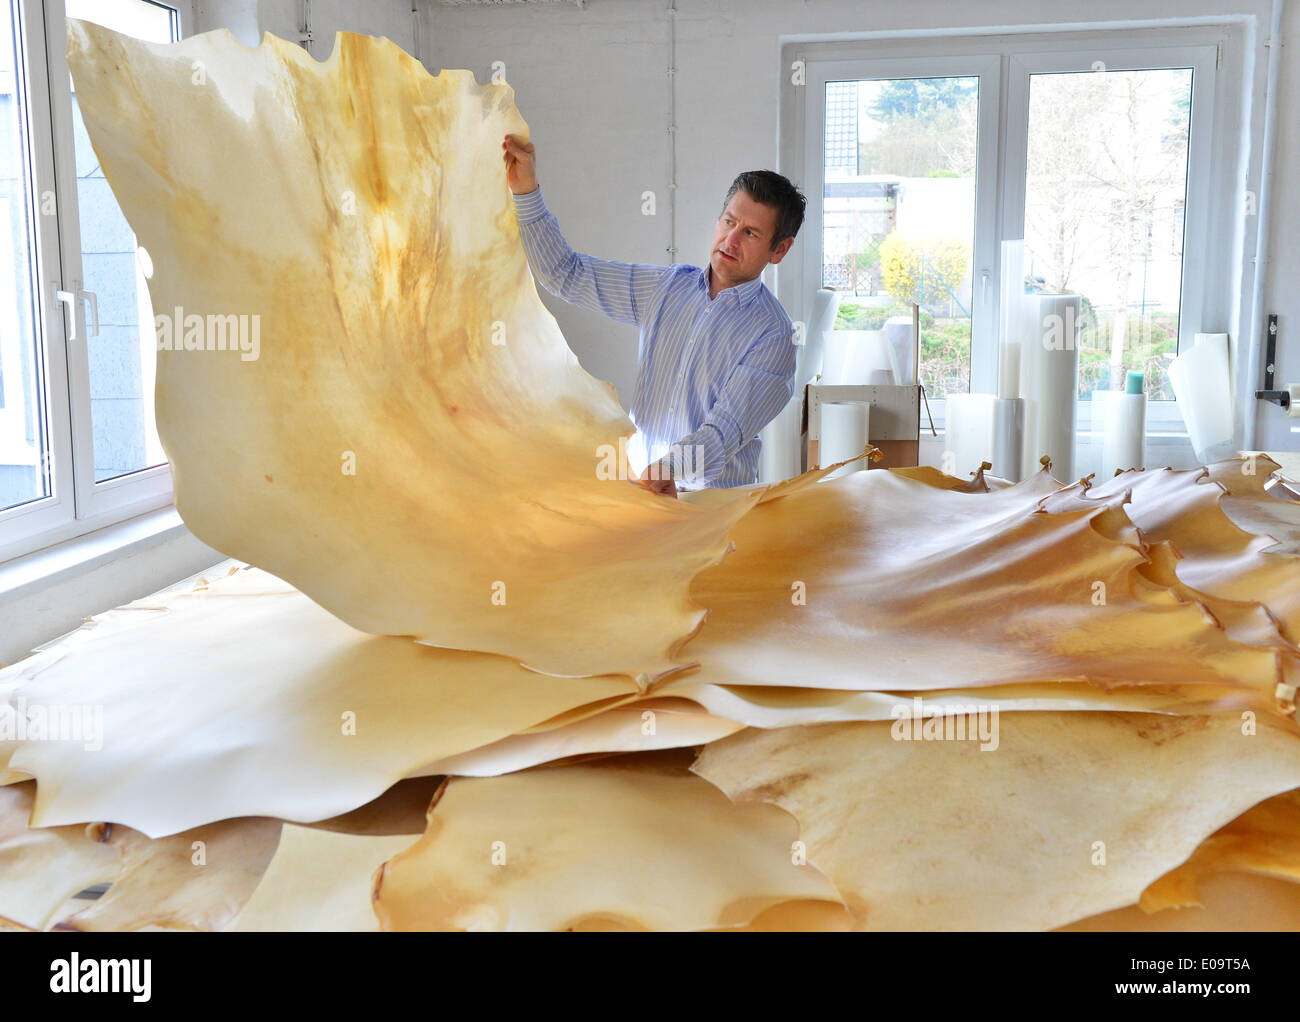 Altenburg, Germany. 24th Mar, 2014. Managing director Steffen Kerbs of parchment manufacturer 'Altenburger Pergament & Trommelfell GmbH' examines a sheet of parchment in Altenburg, Germany, 24 March 2014. The company was founded in 1882 and is nowadays one of the last remaining producers of parchments in Germany. Photo: Martin Schutt/dpa/Alamy Live News Stock Photo